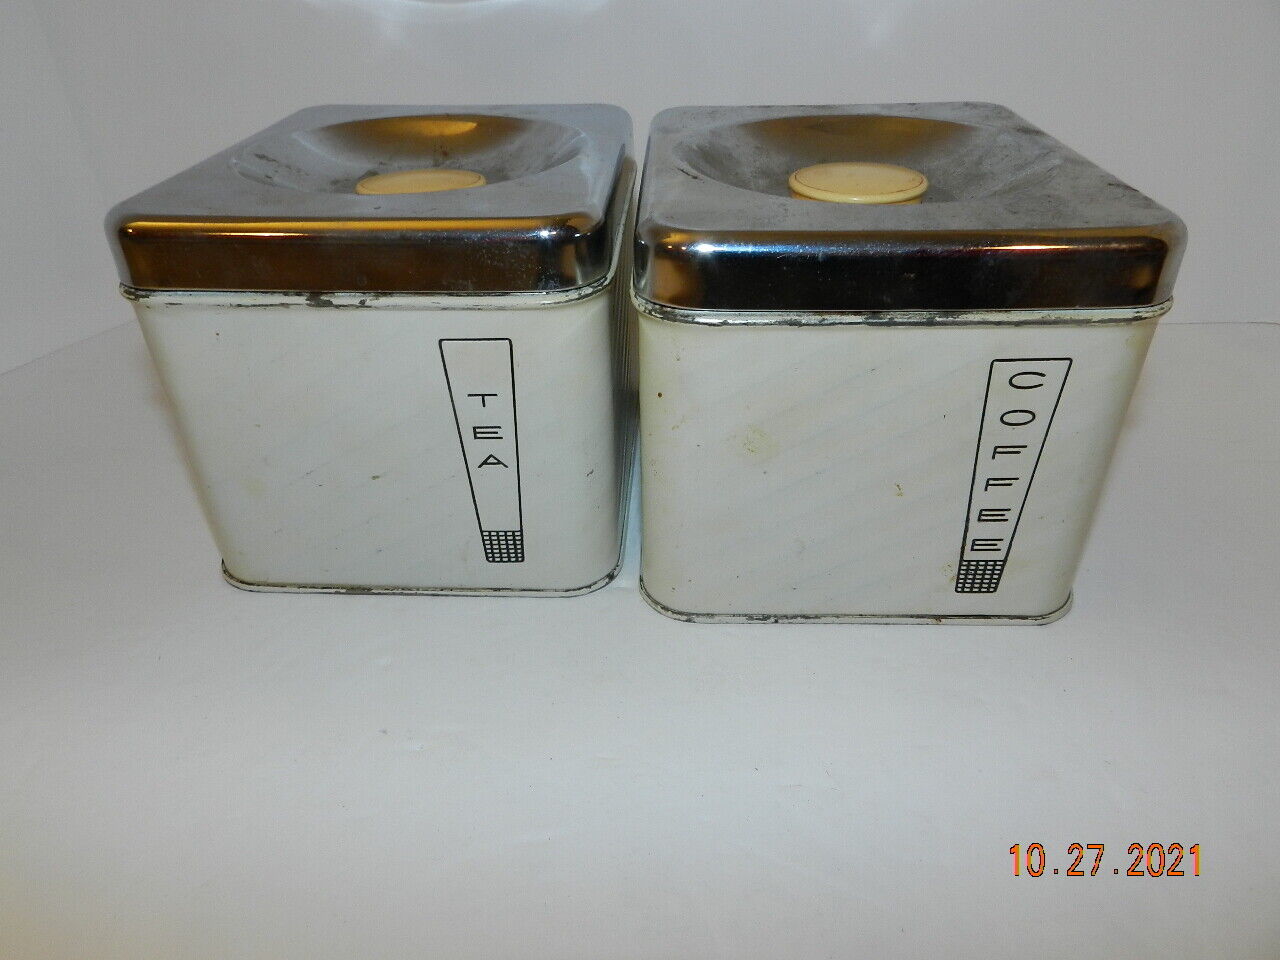  2 Vintage Lincoln BeautyWare pin-striped Wedge Canisters  Coffee and Tea